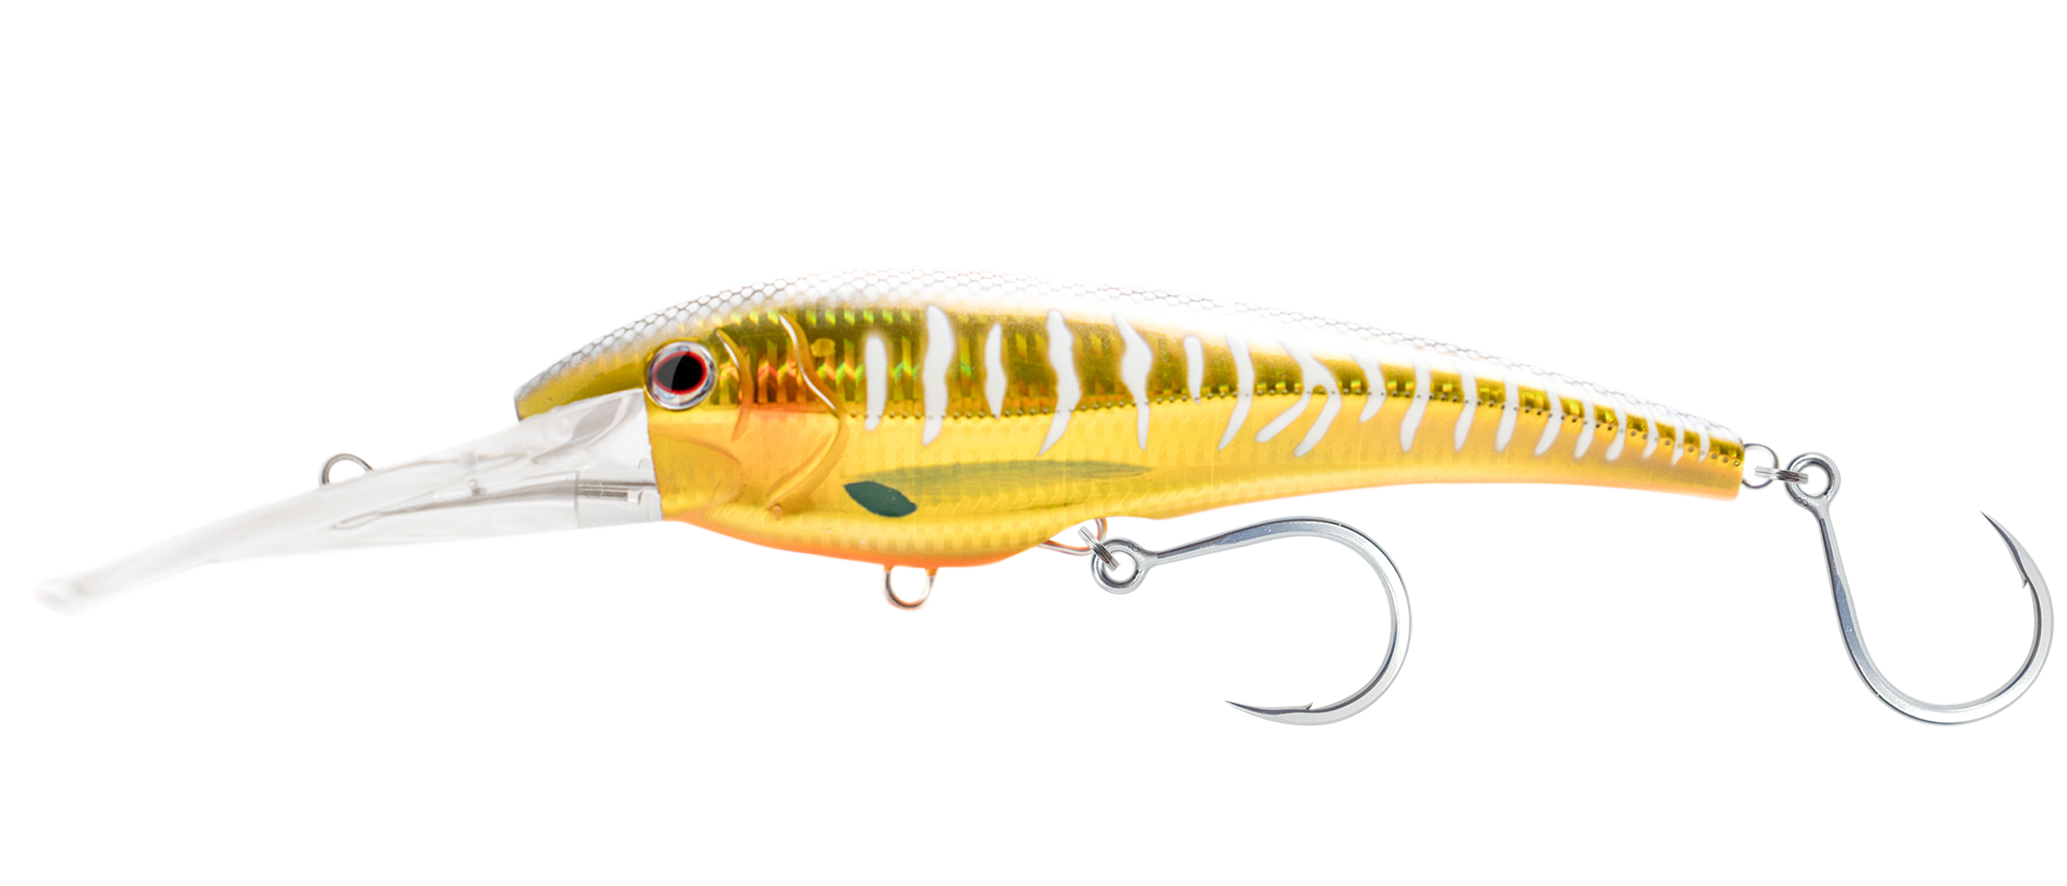 Nomad Design DTX Minnow Sinking 220 Long Range Special (LRS)